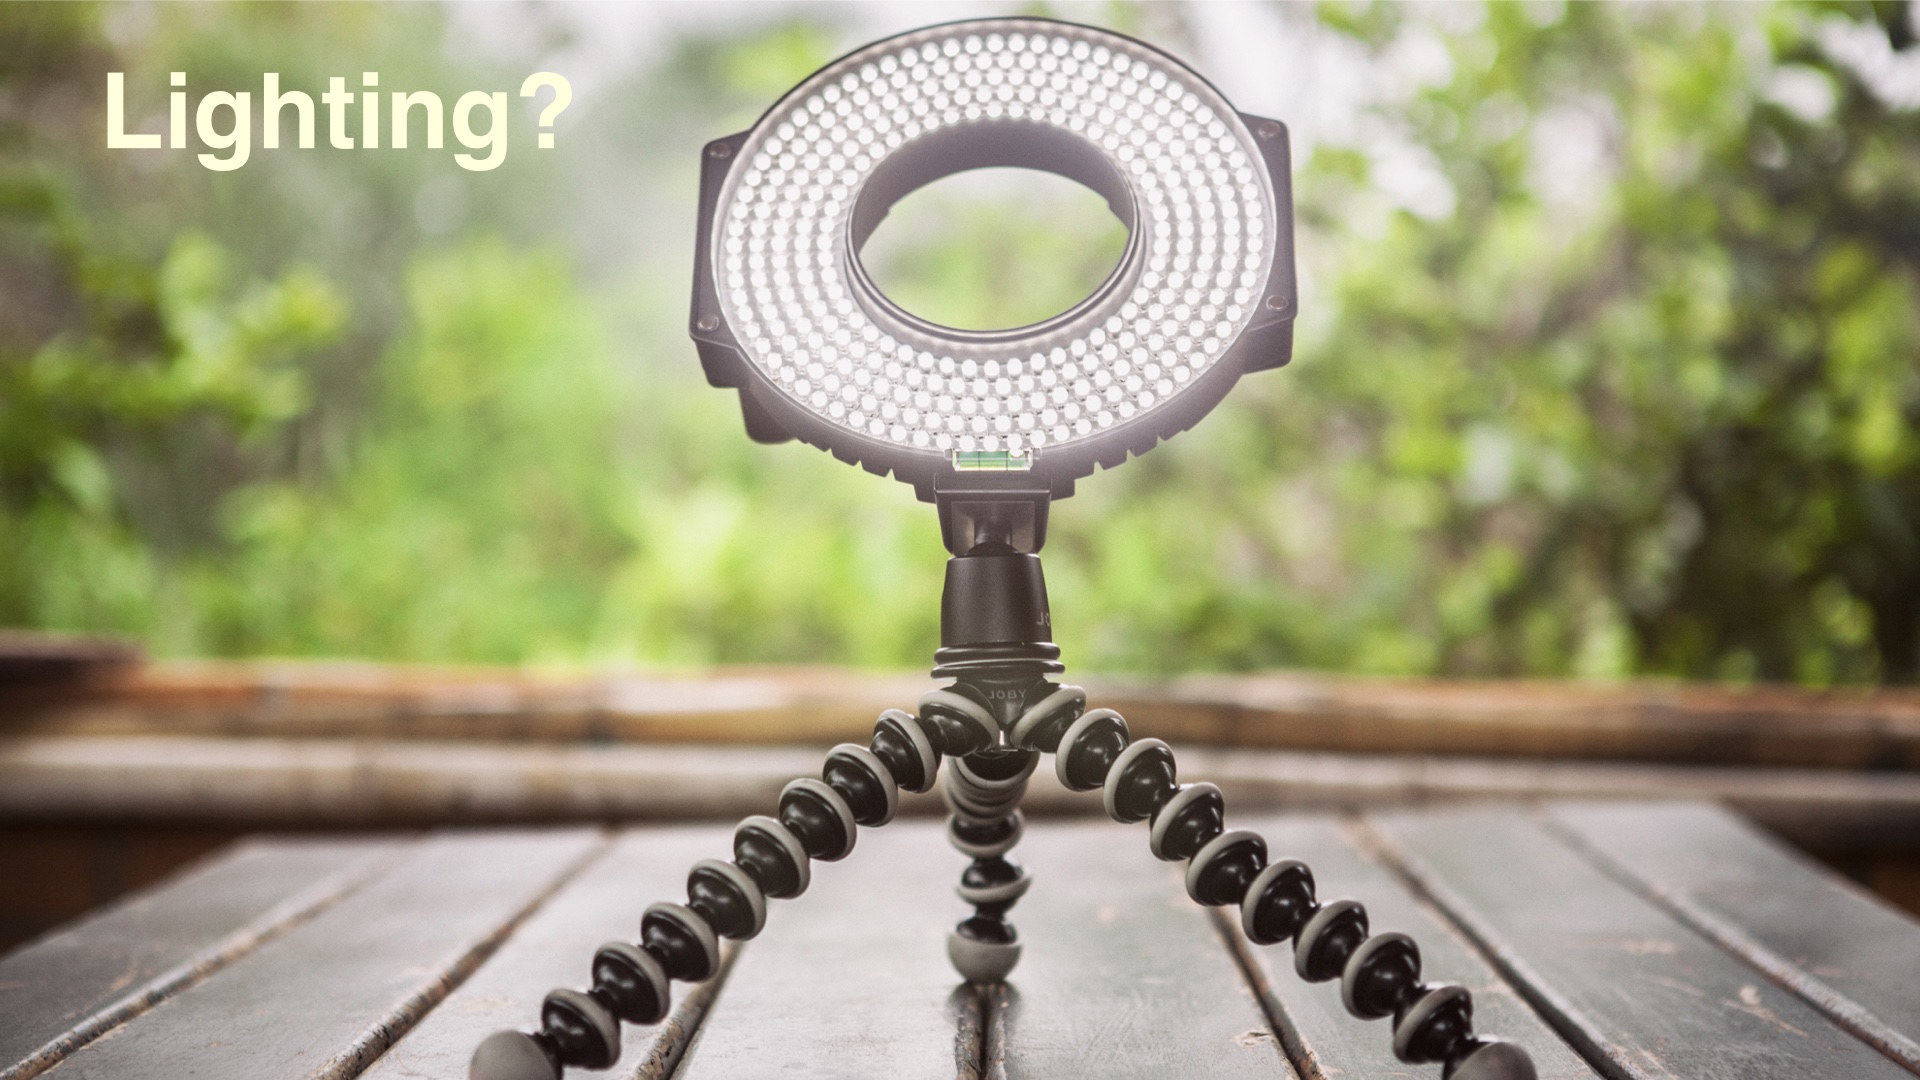 Image of fancy ring light on an outdoor deck with the heading 'Lighting?'